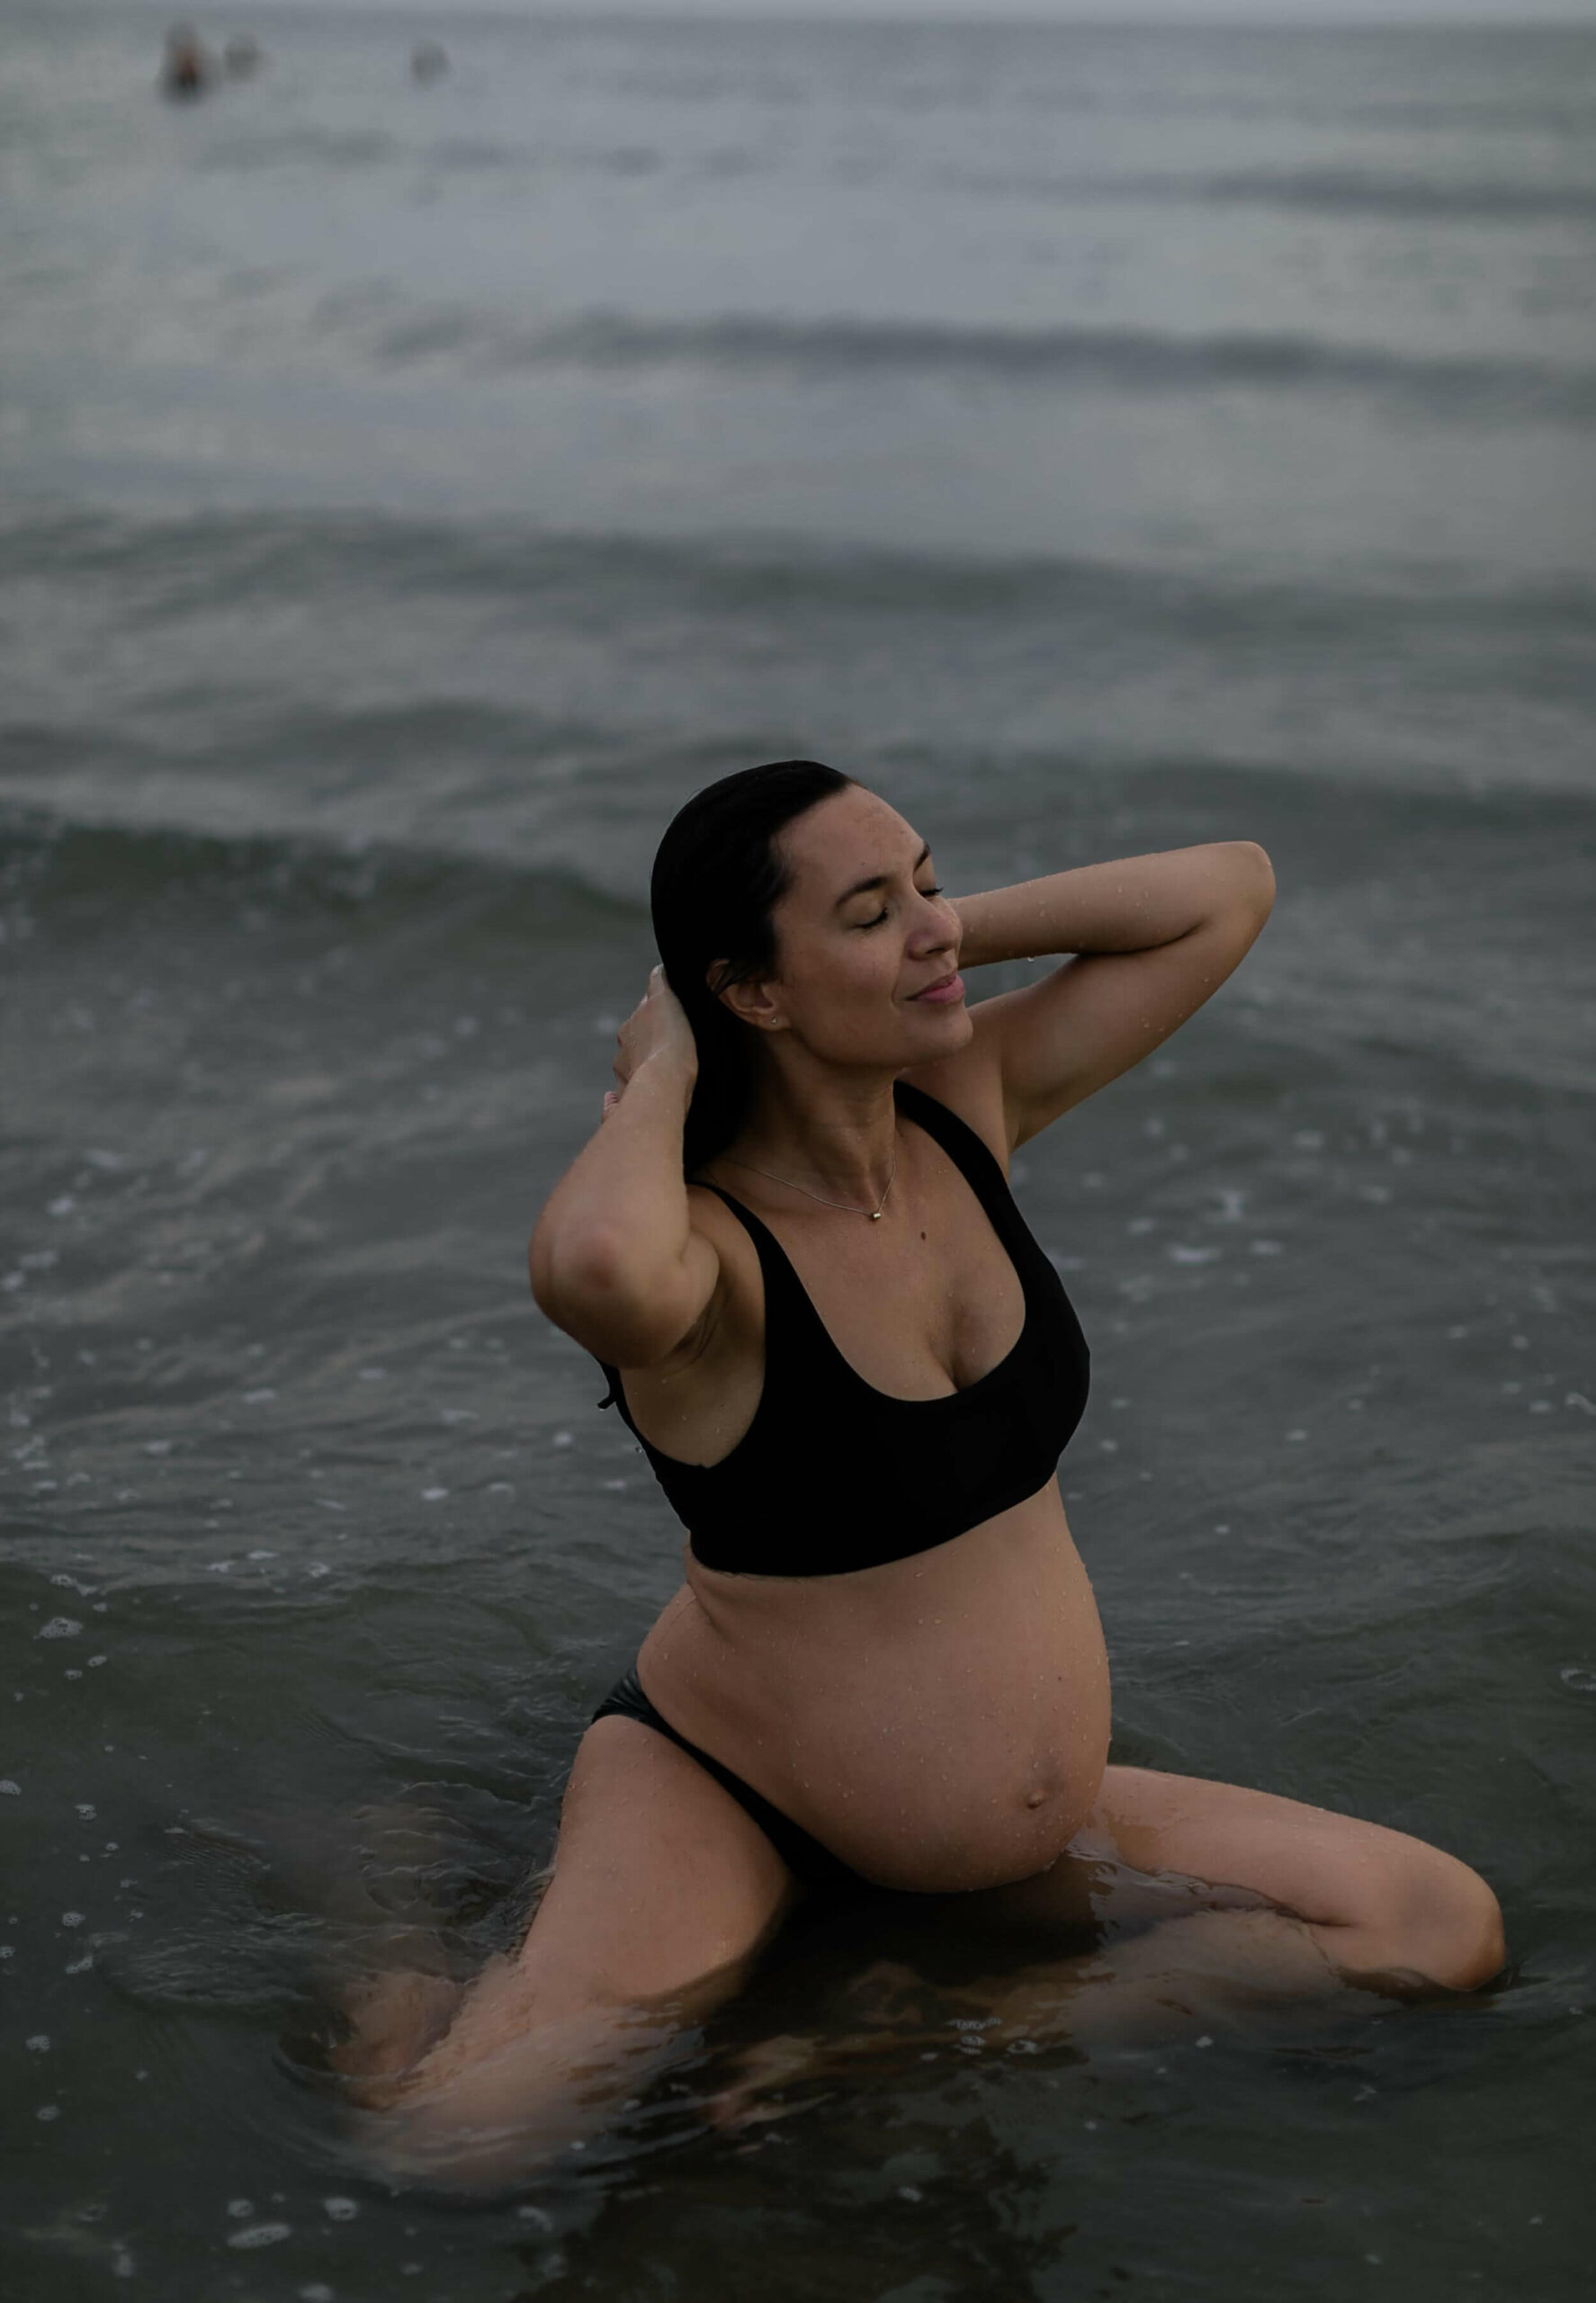 alt="tranquil maternity portrait session at golden hour at the beach Zandvoort, Netherlands"